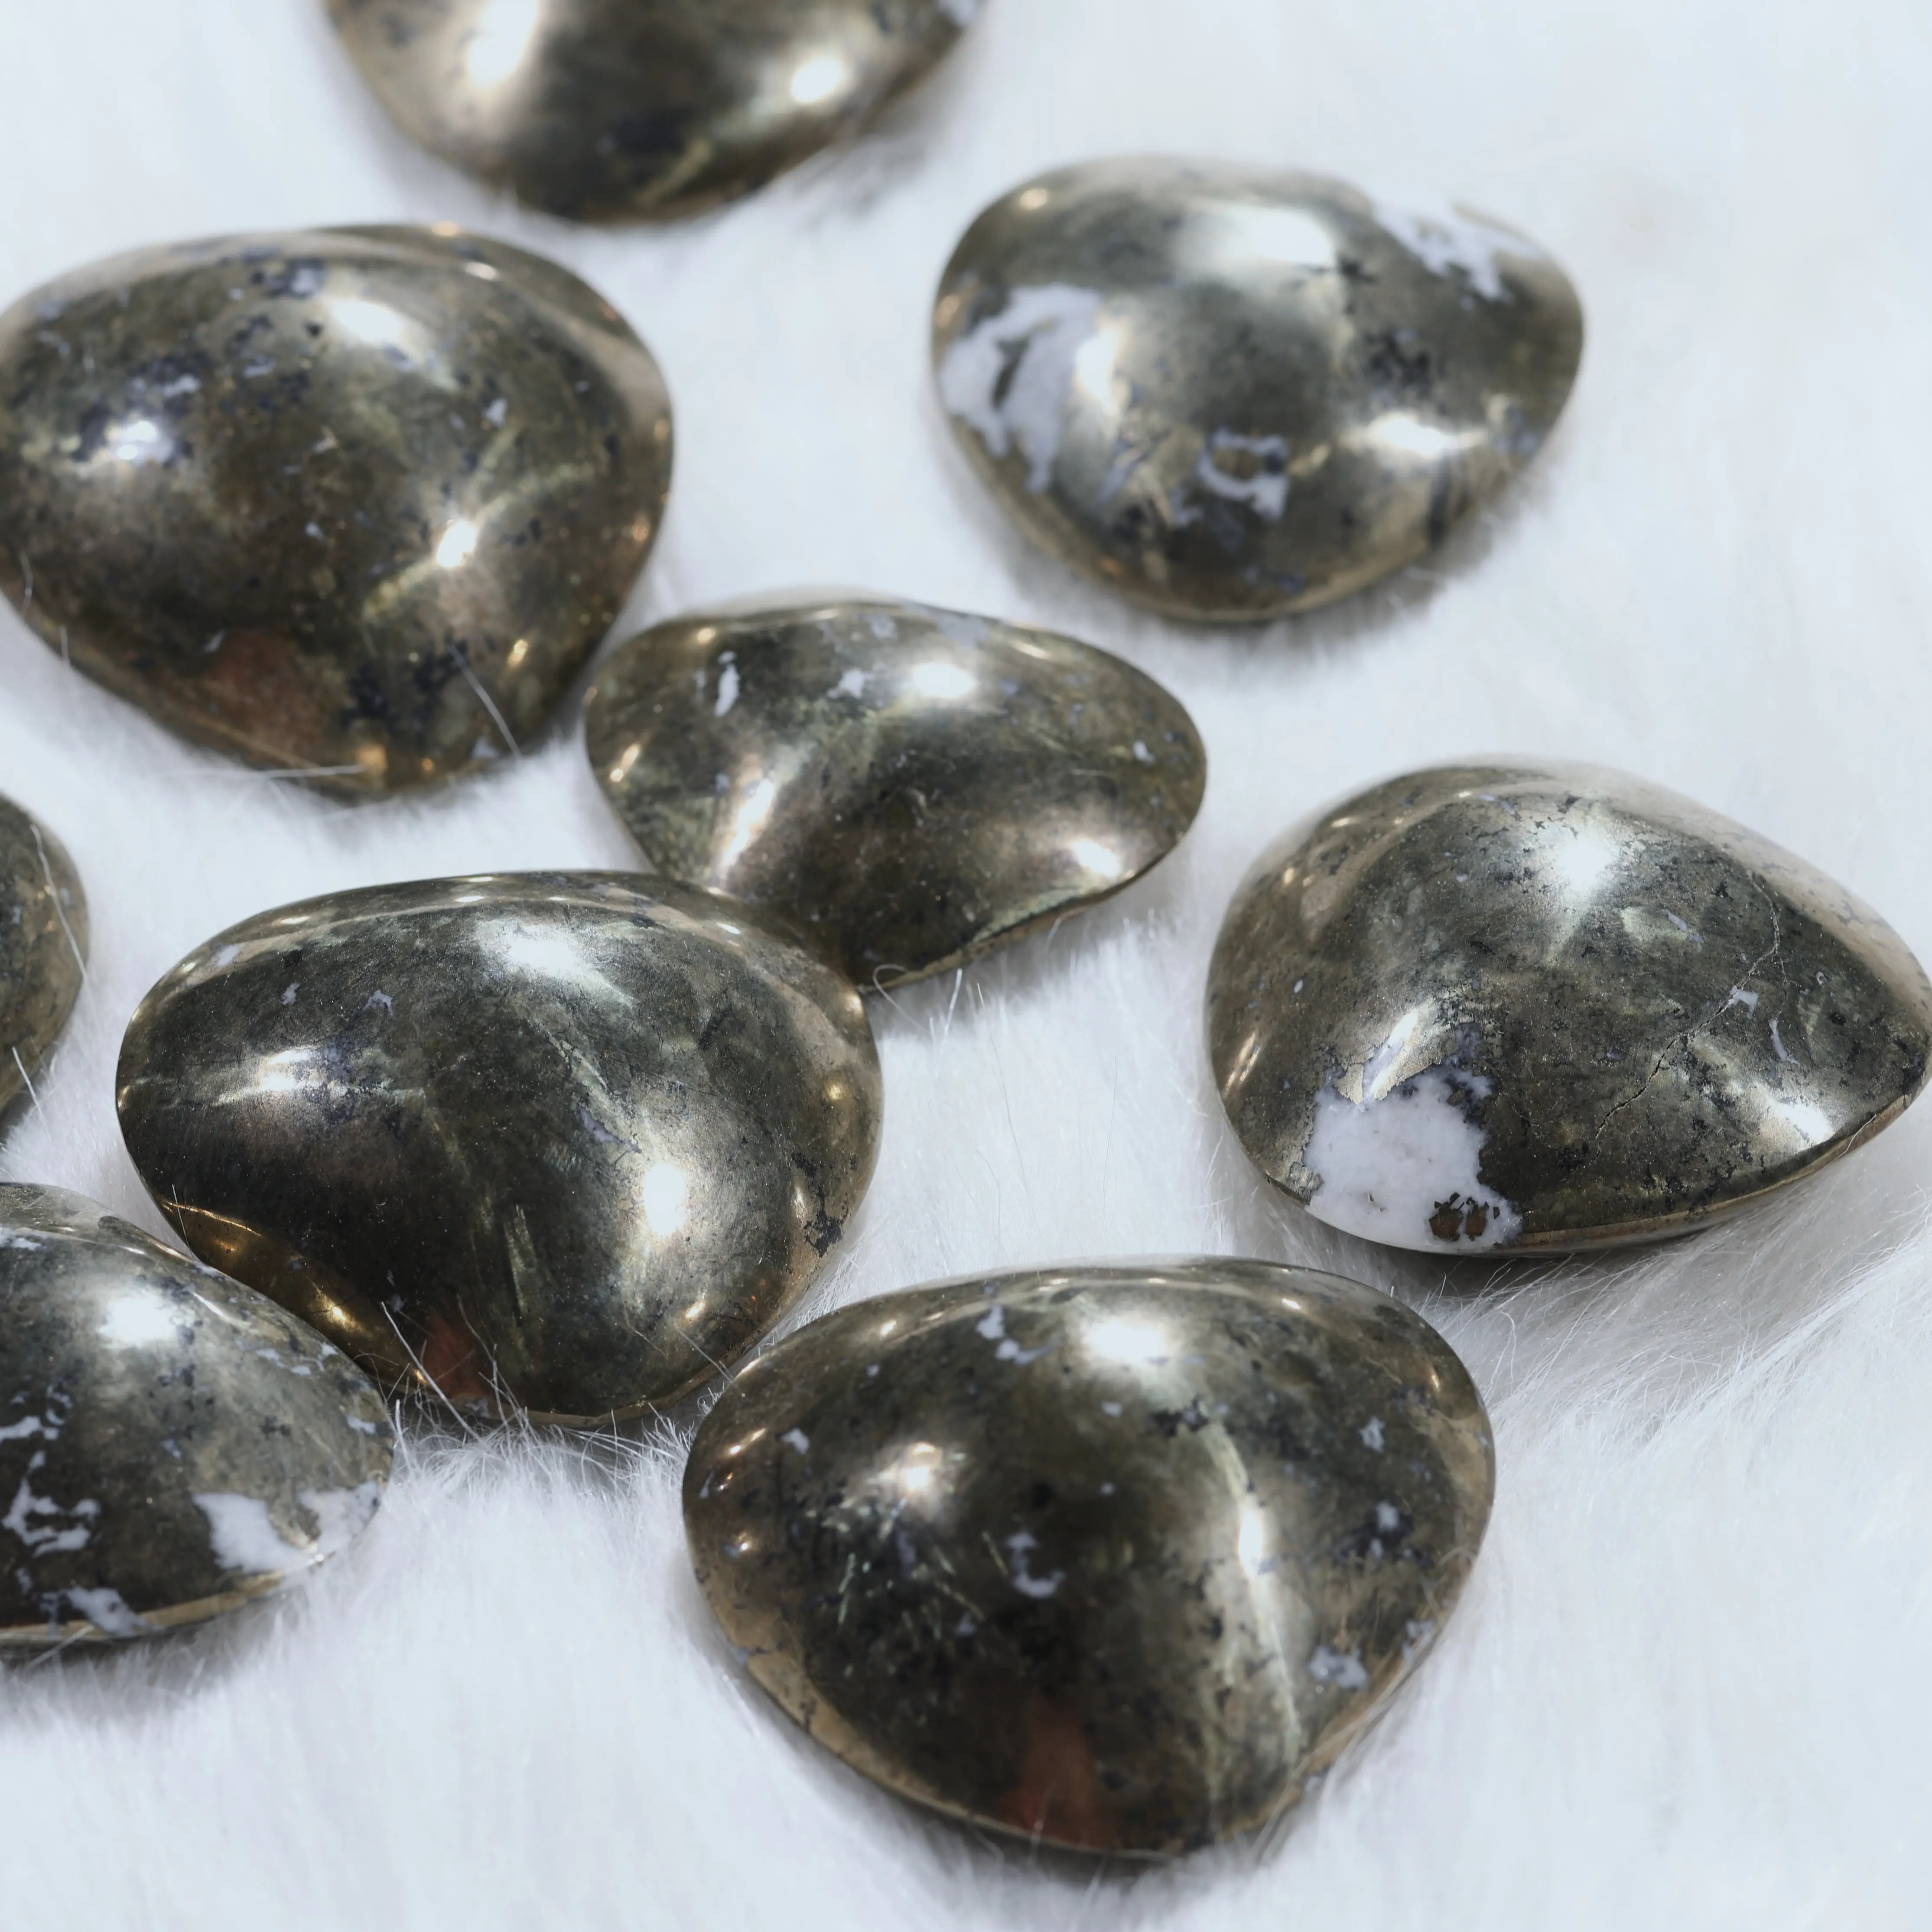 New Arrivals Spiritual Products Crystals Love Heart Natural Pyrite Heart Shaped Stones For Sale